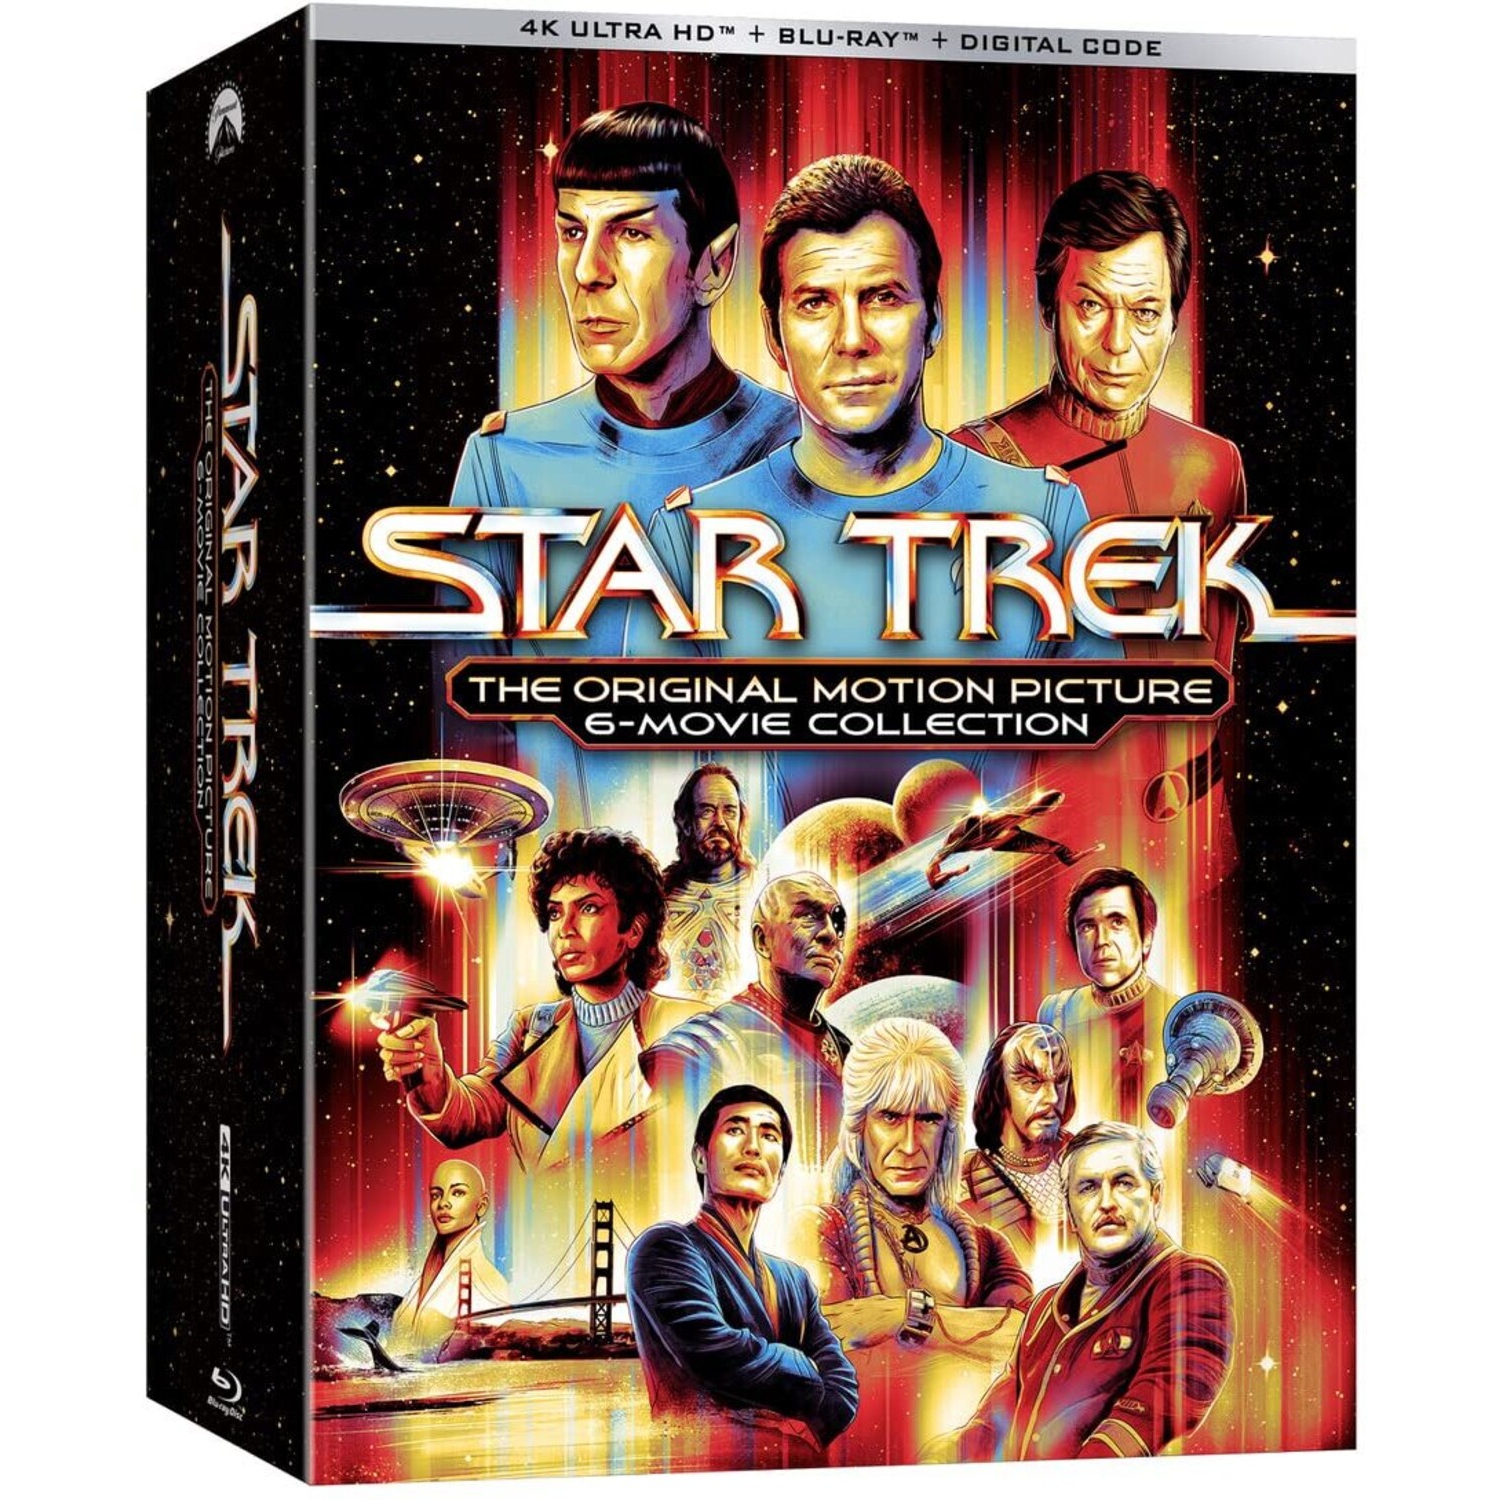 Star Trek: The Original Motion Picture 6-Movie Collection [ULTRA HD]